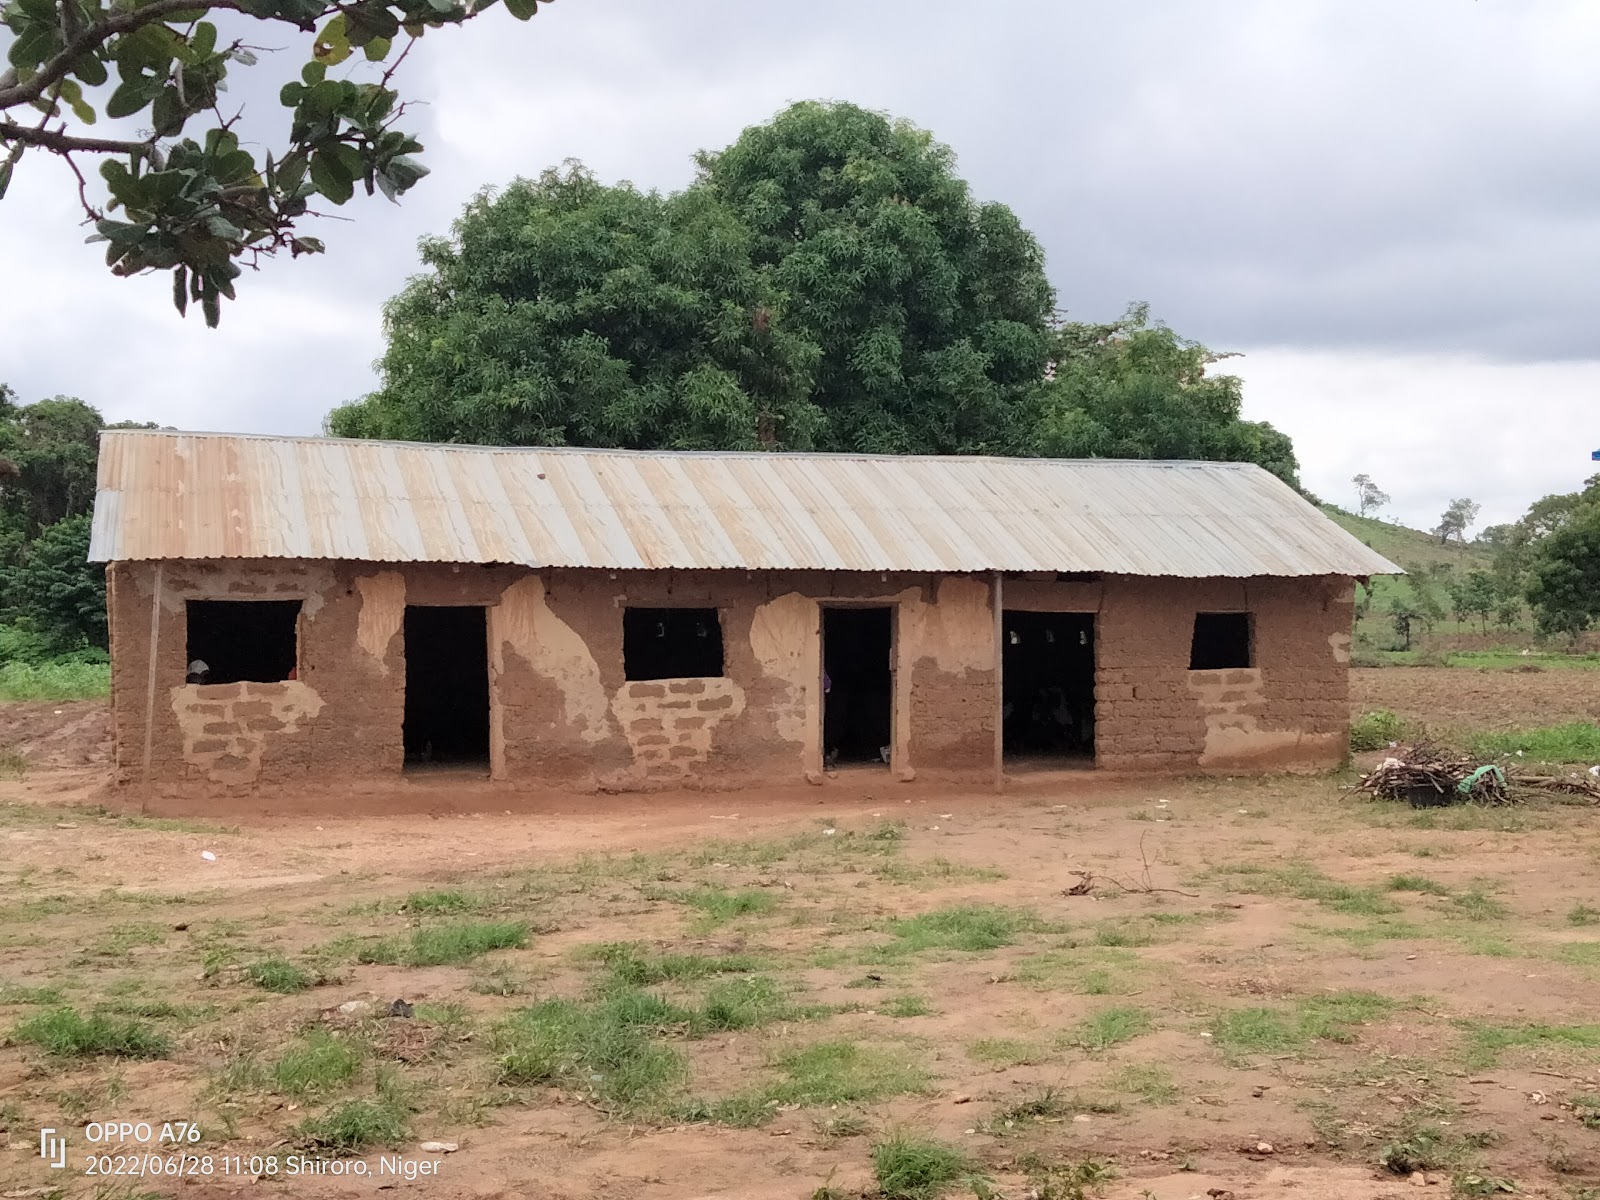 SPECIAL REPORT: In This Niger School, Oddity Prevails 2